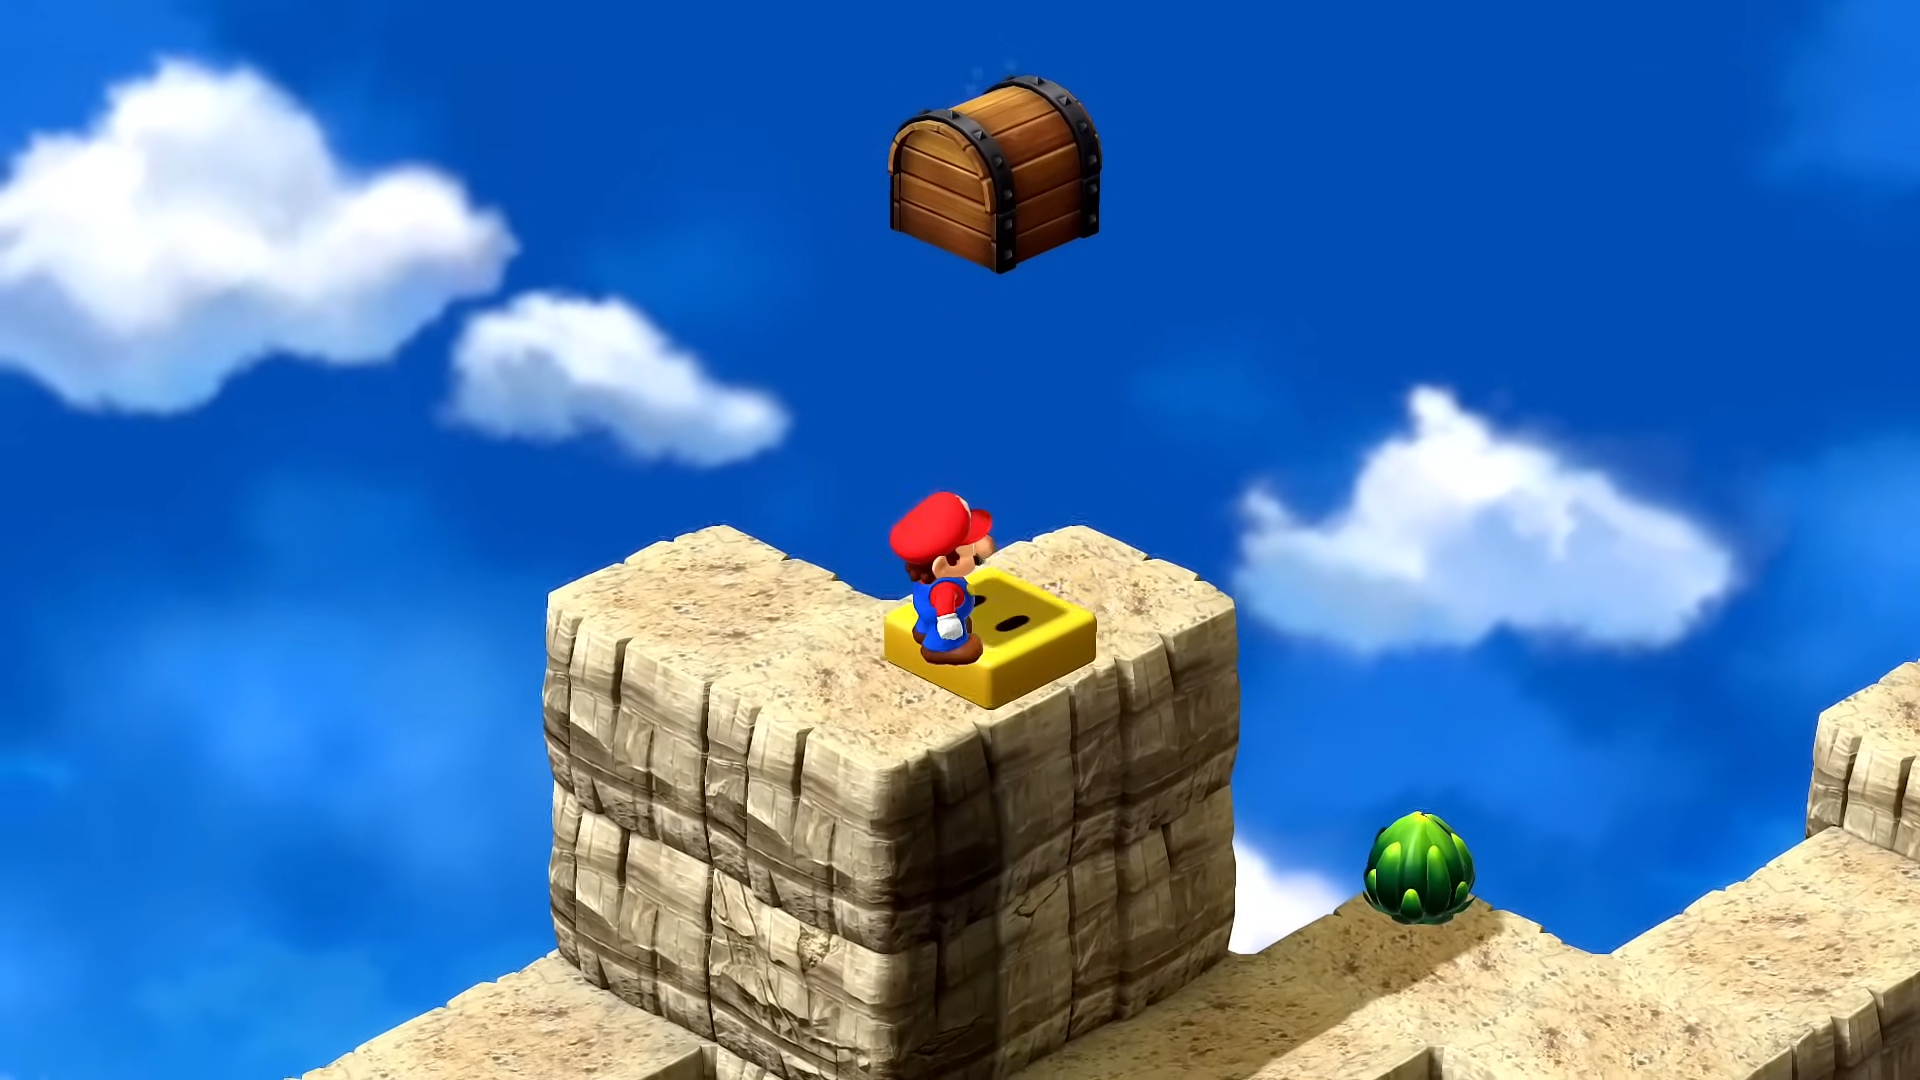 Mario standing on a floating platform.